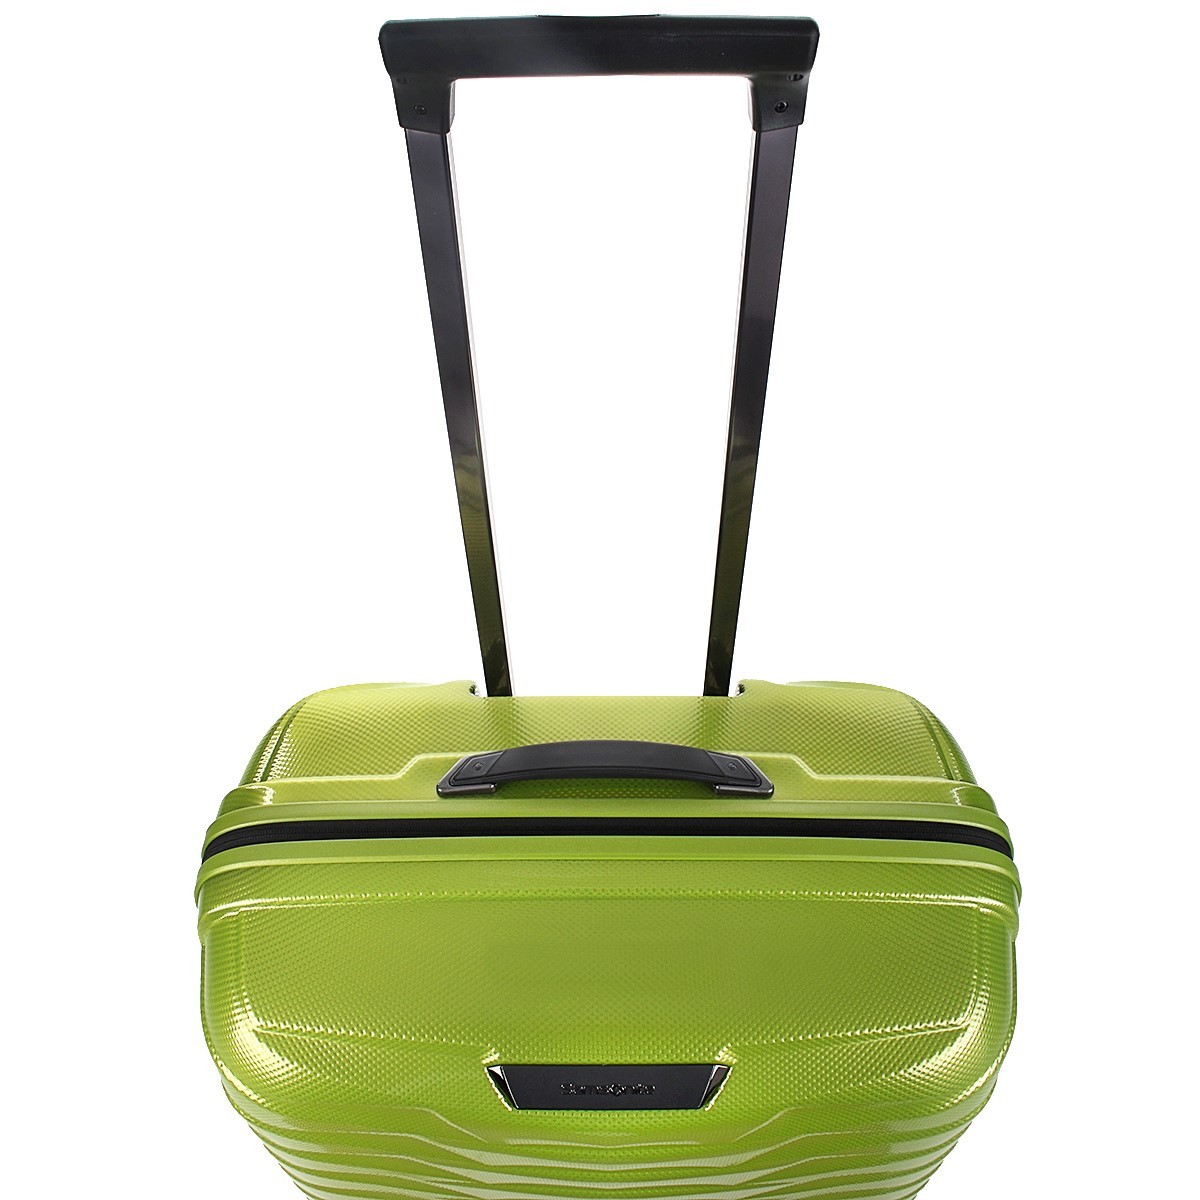 Samsonite Spinner l 4 ruote Lime Proxis CW6*74003